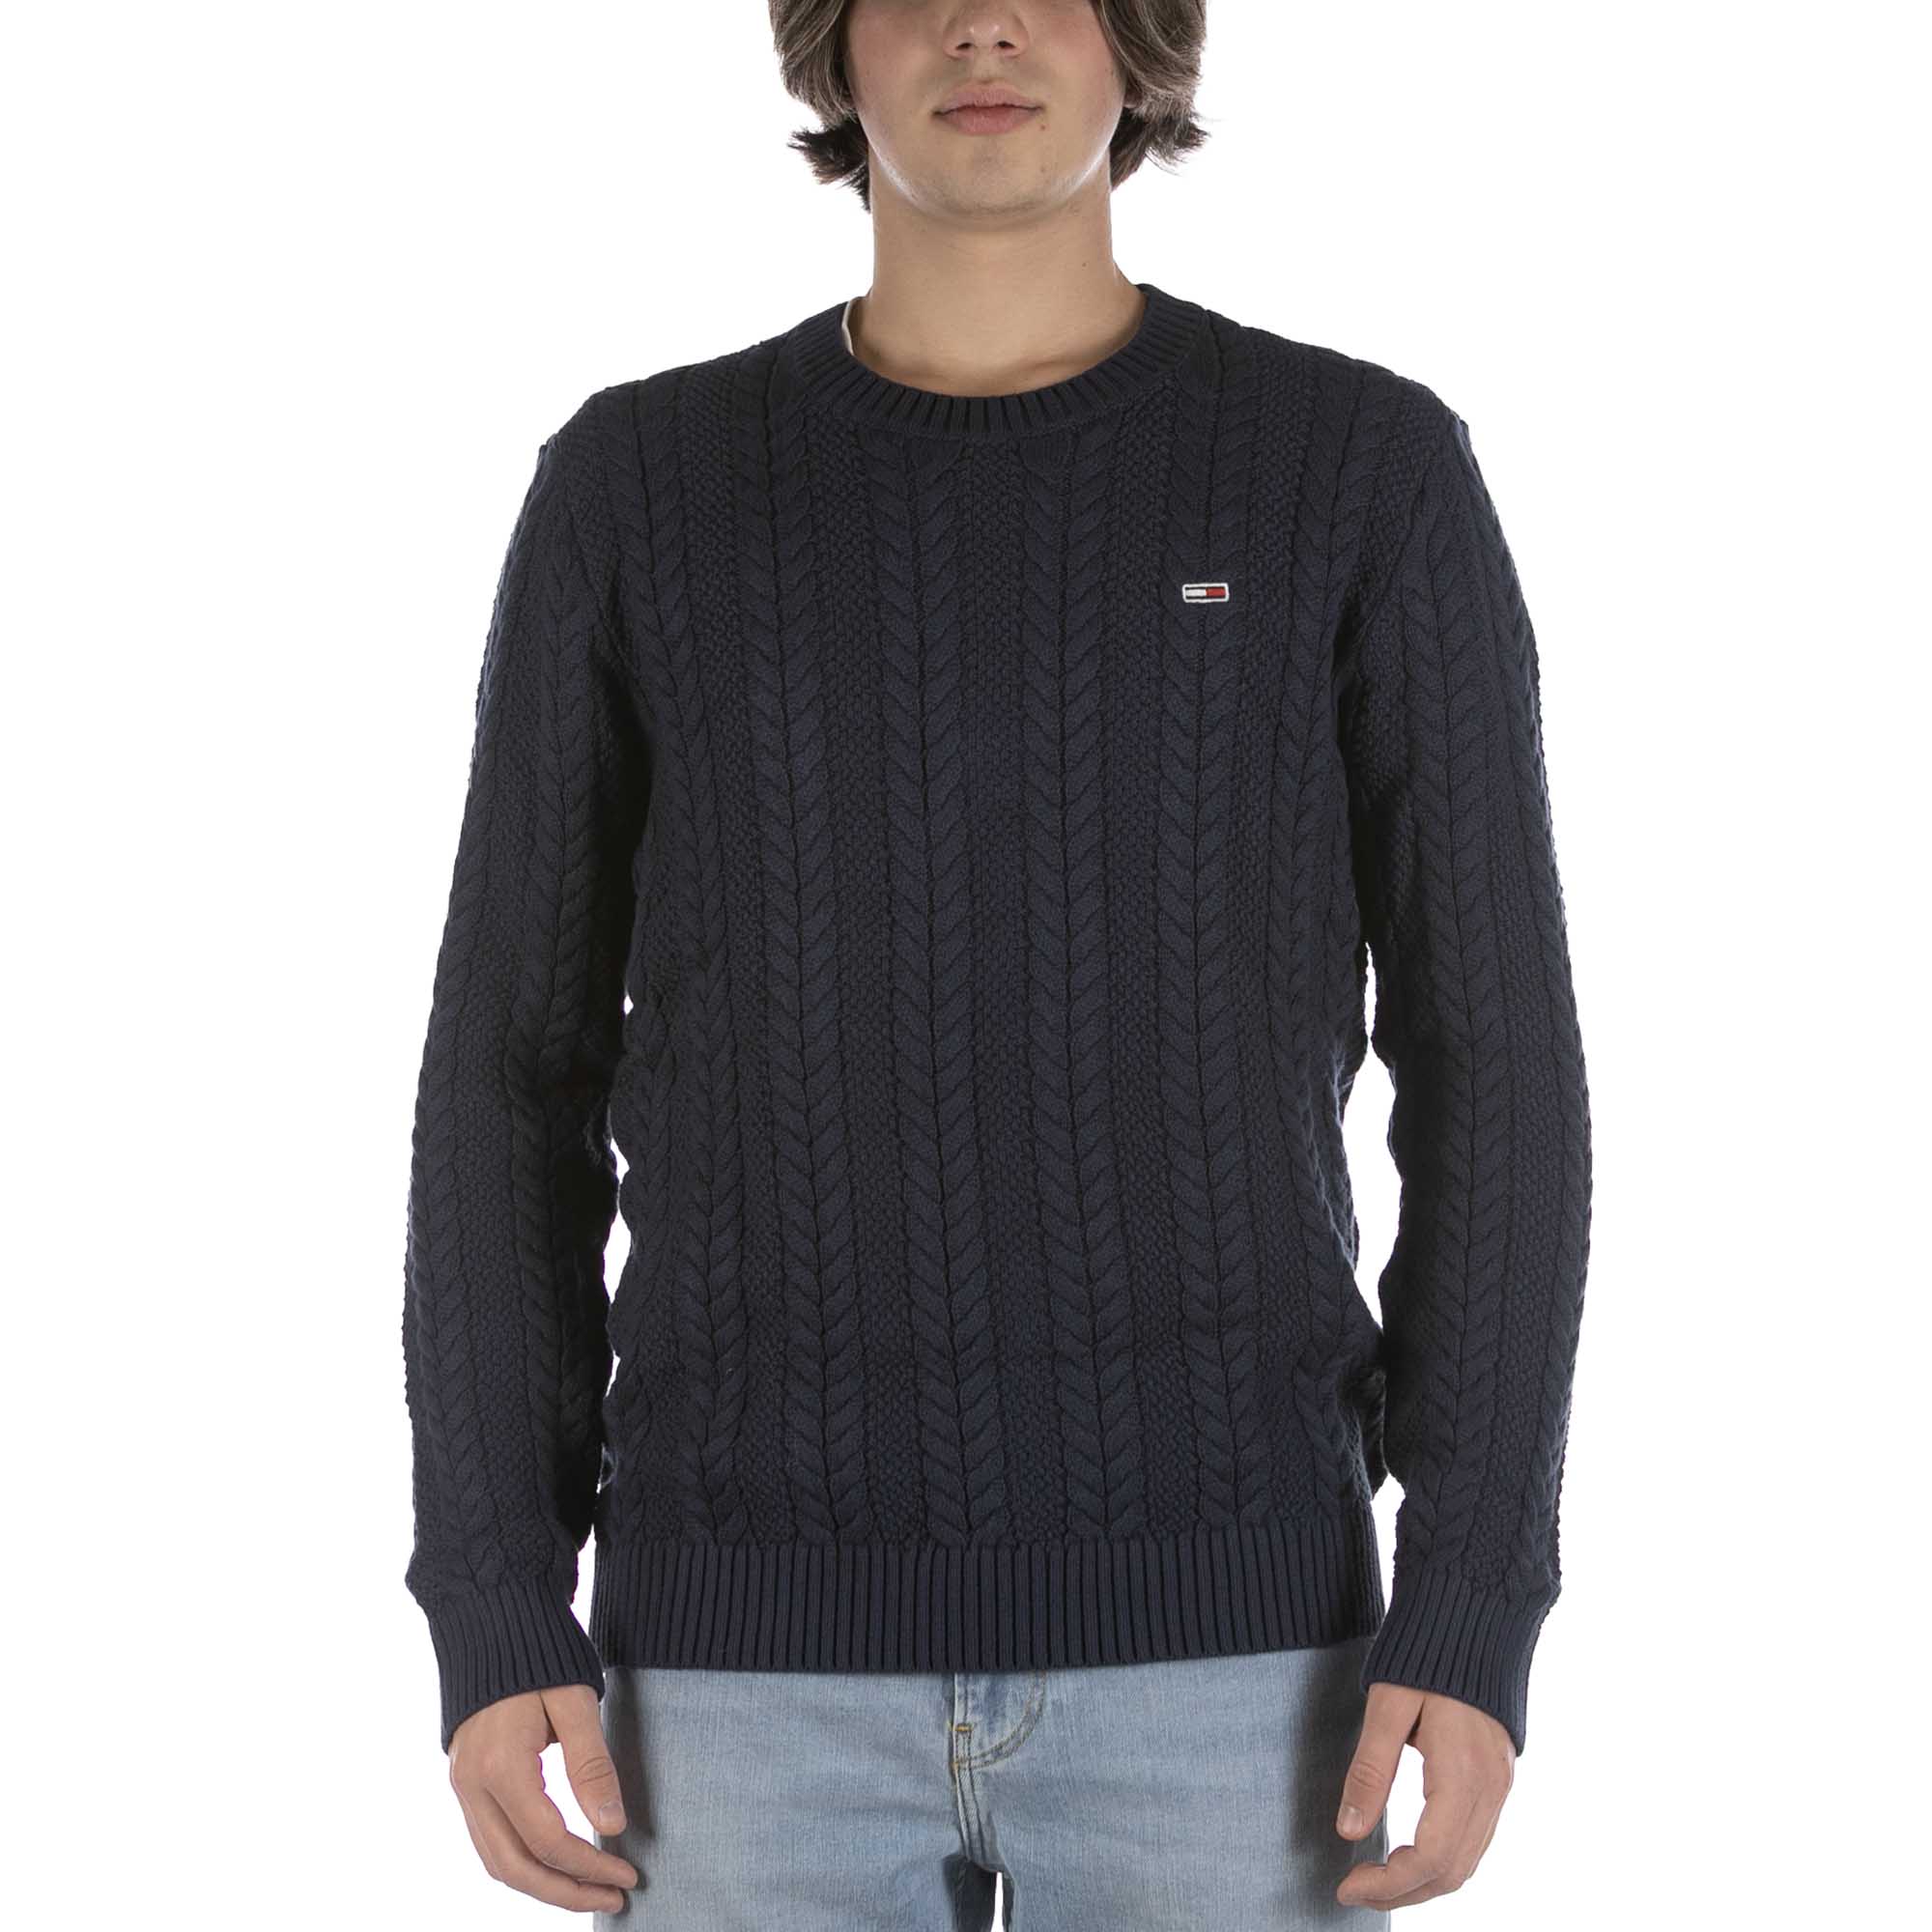 Phalanx Tell other MAGLIONE TOMMY HILFIGER REGULAR CABLE BLU